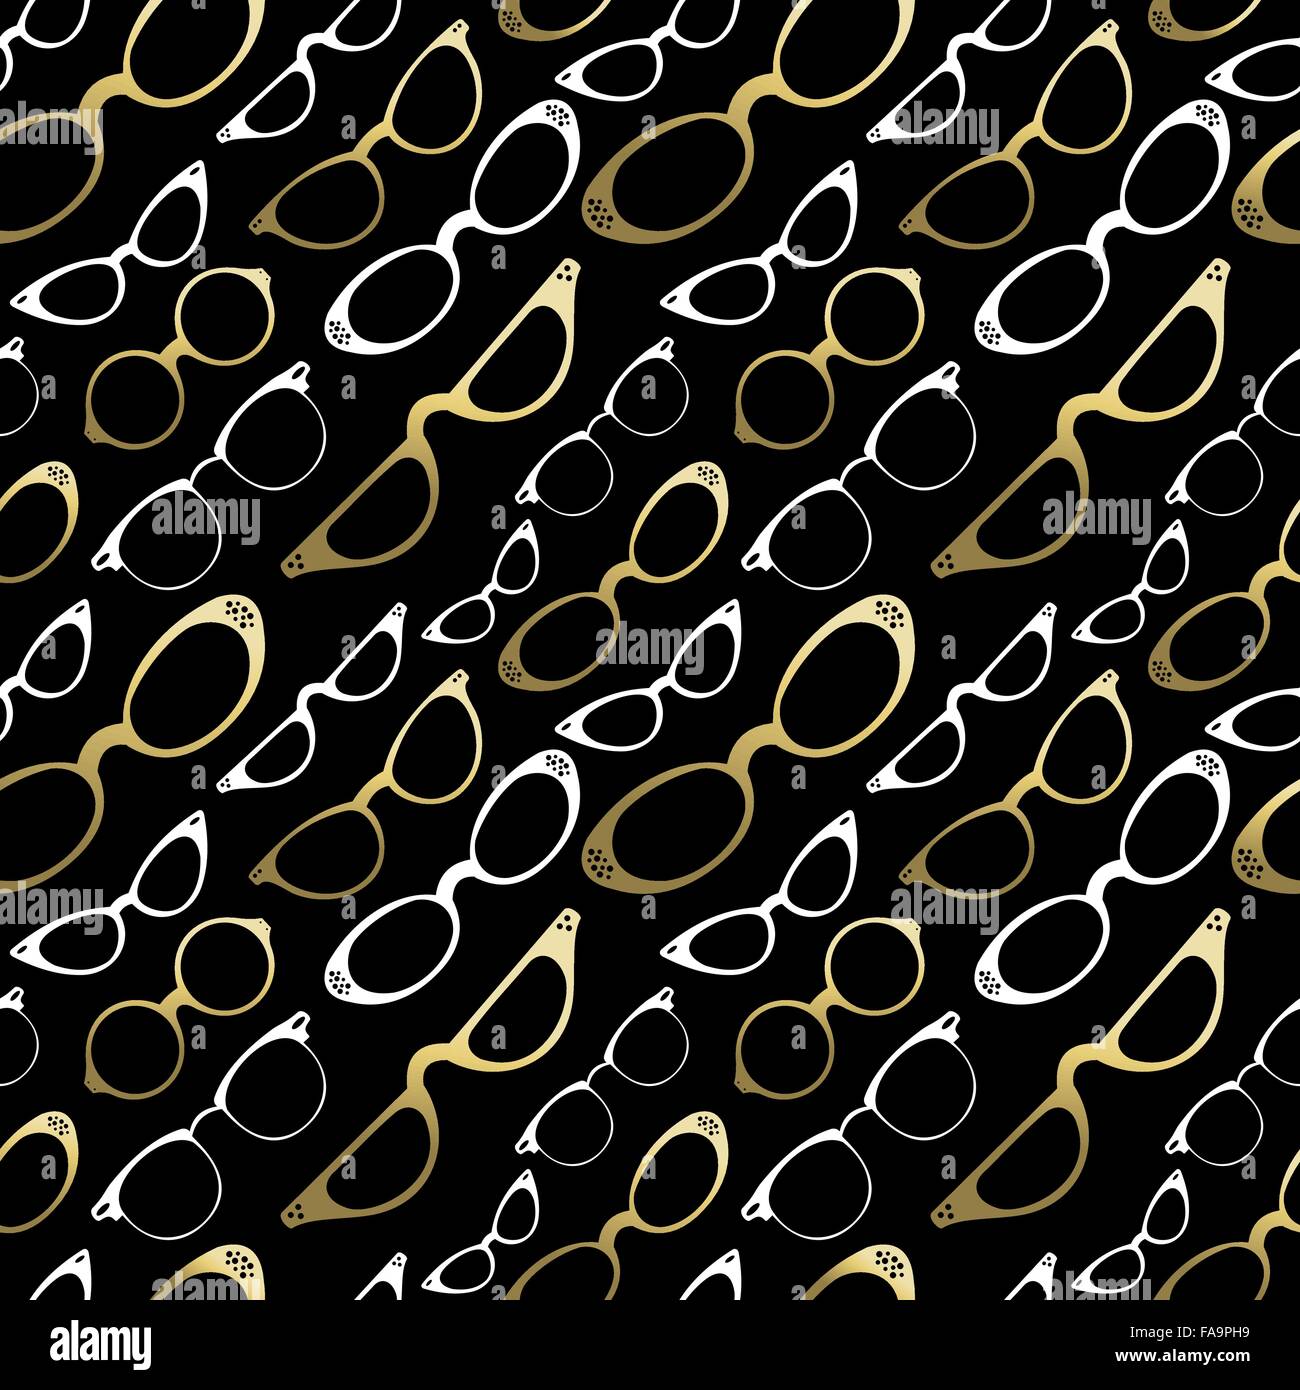 Hipster glasses seamless pattern, vintage style gold icons. EPS10 vector. Stock Vector